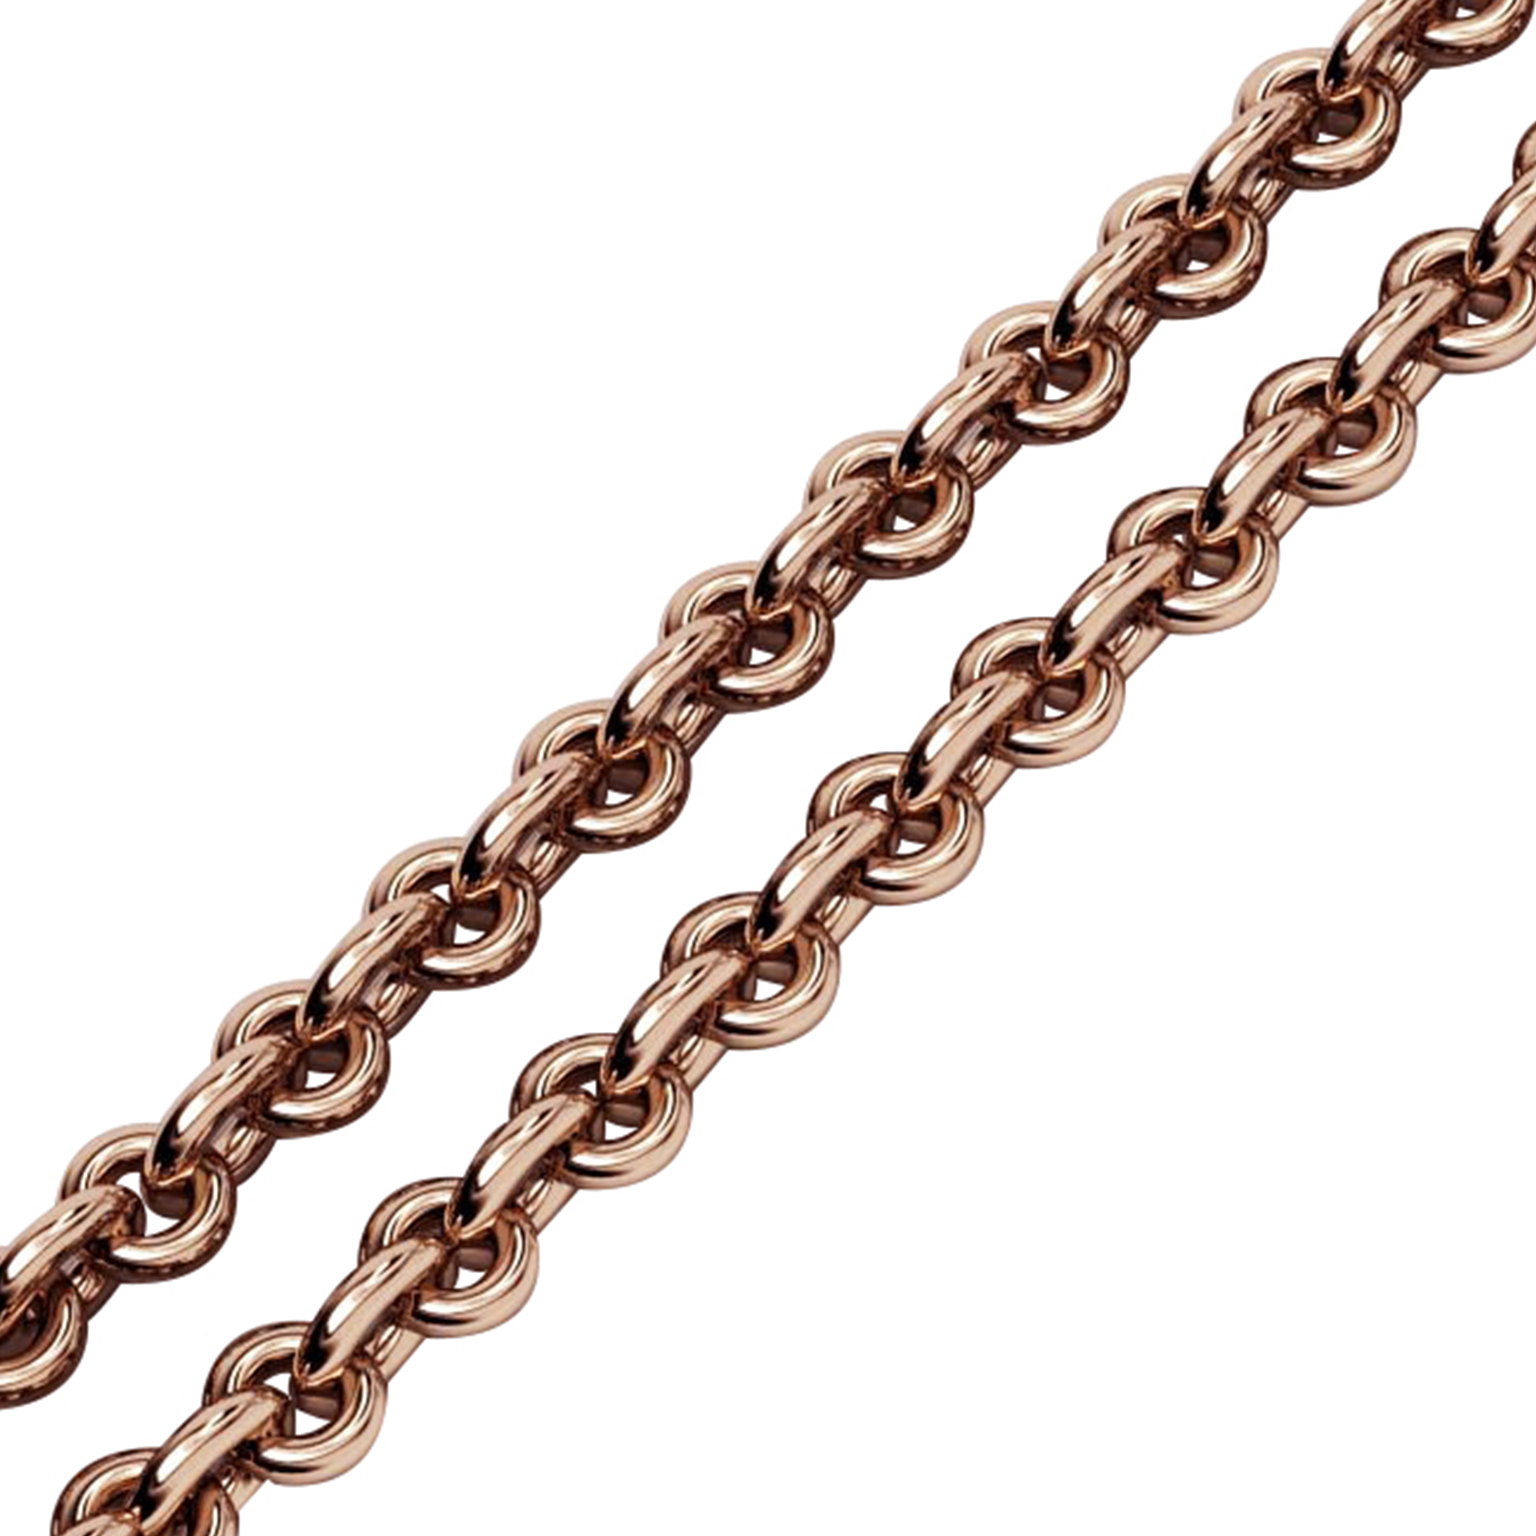 rollo-99 chain necklace, made of 18k rose gold vermeil on 925 sterling silver / 40 cm – 15,75''